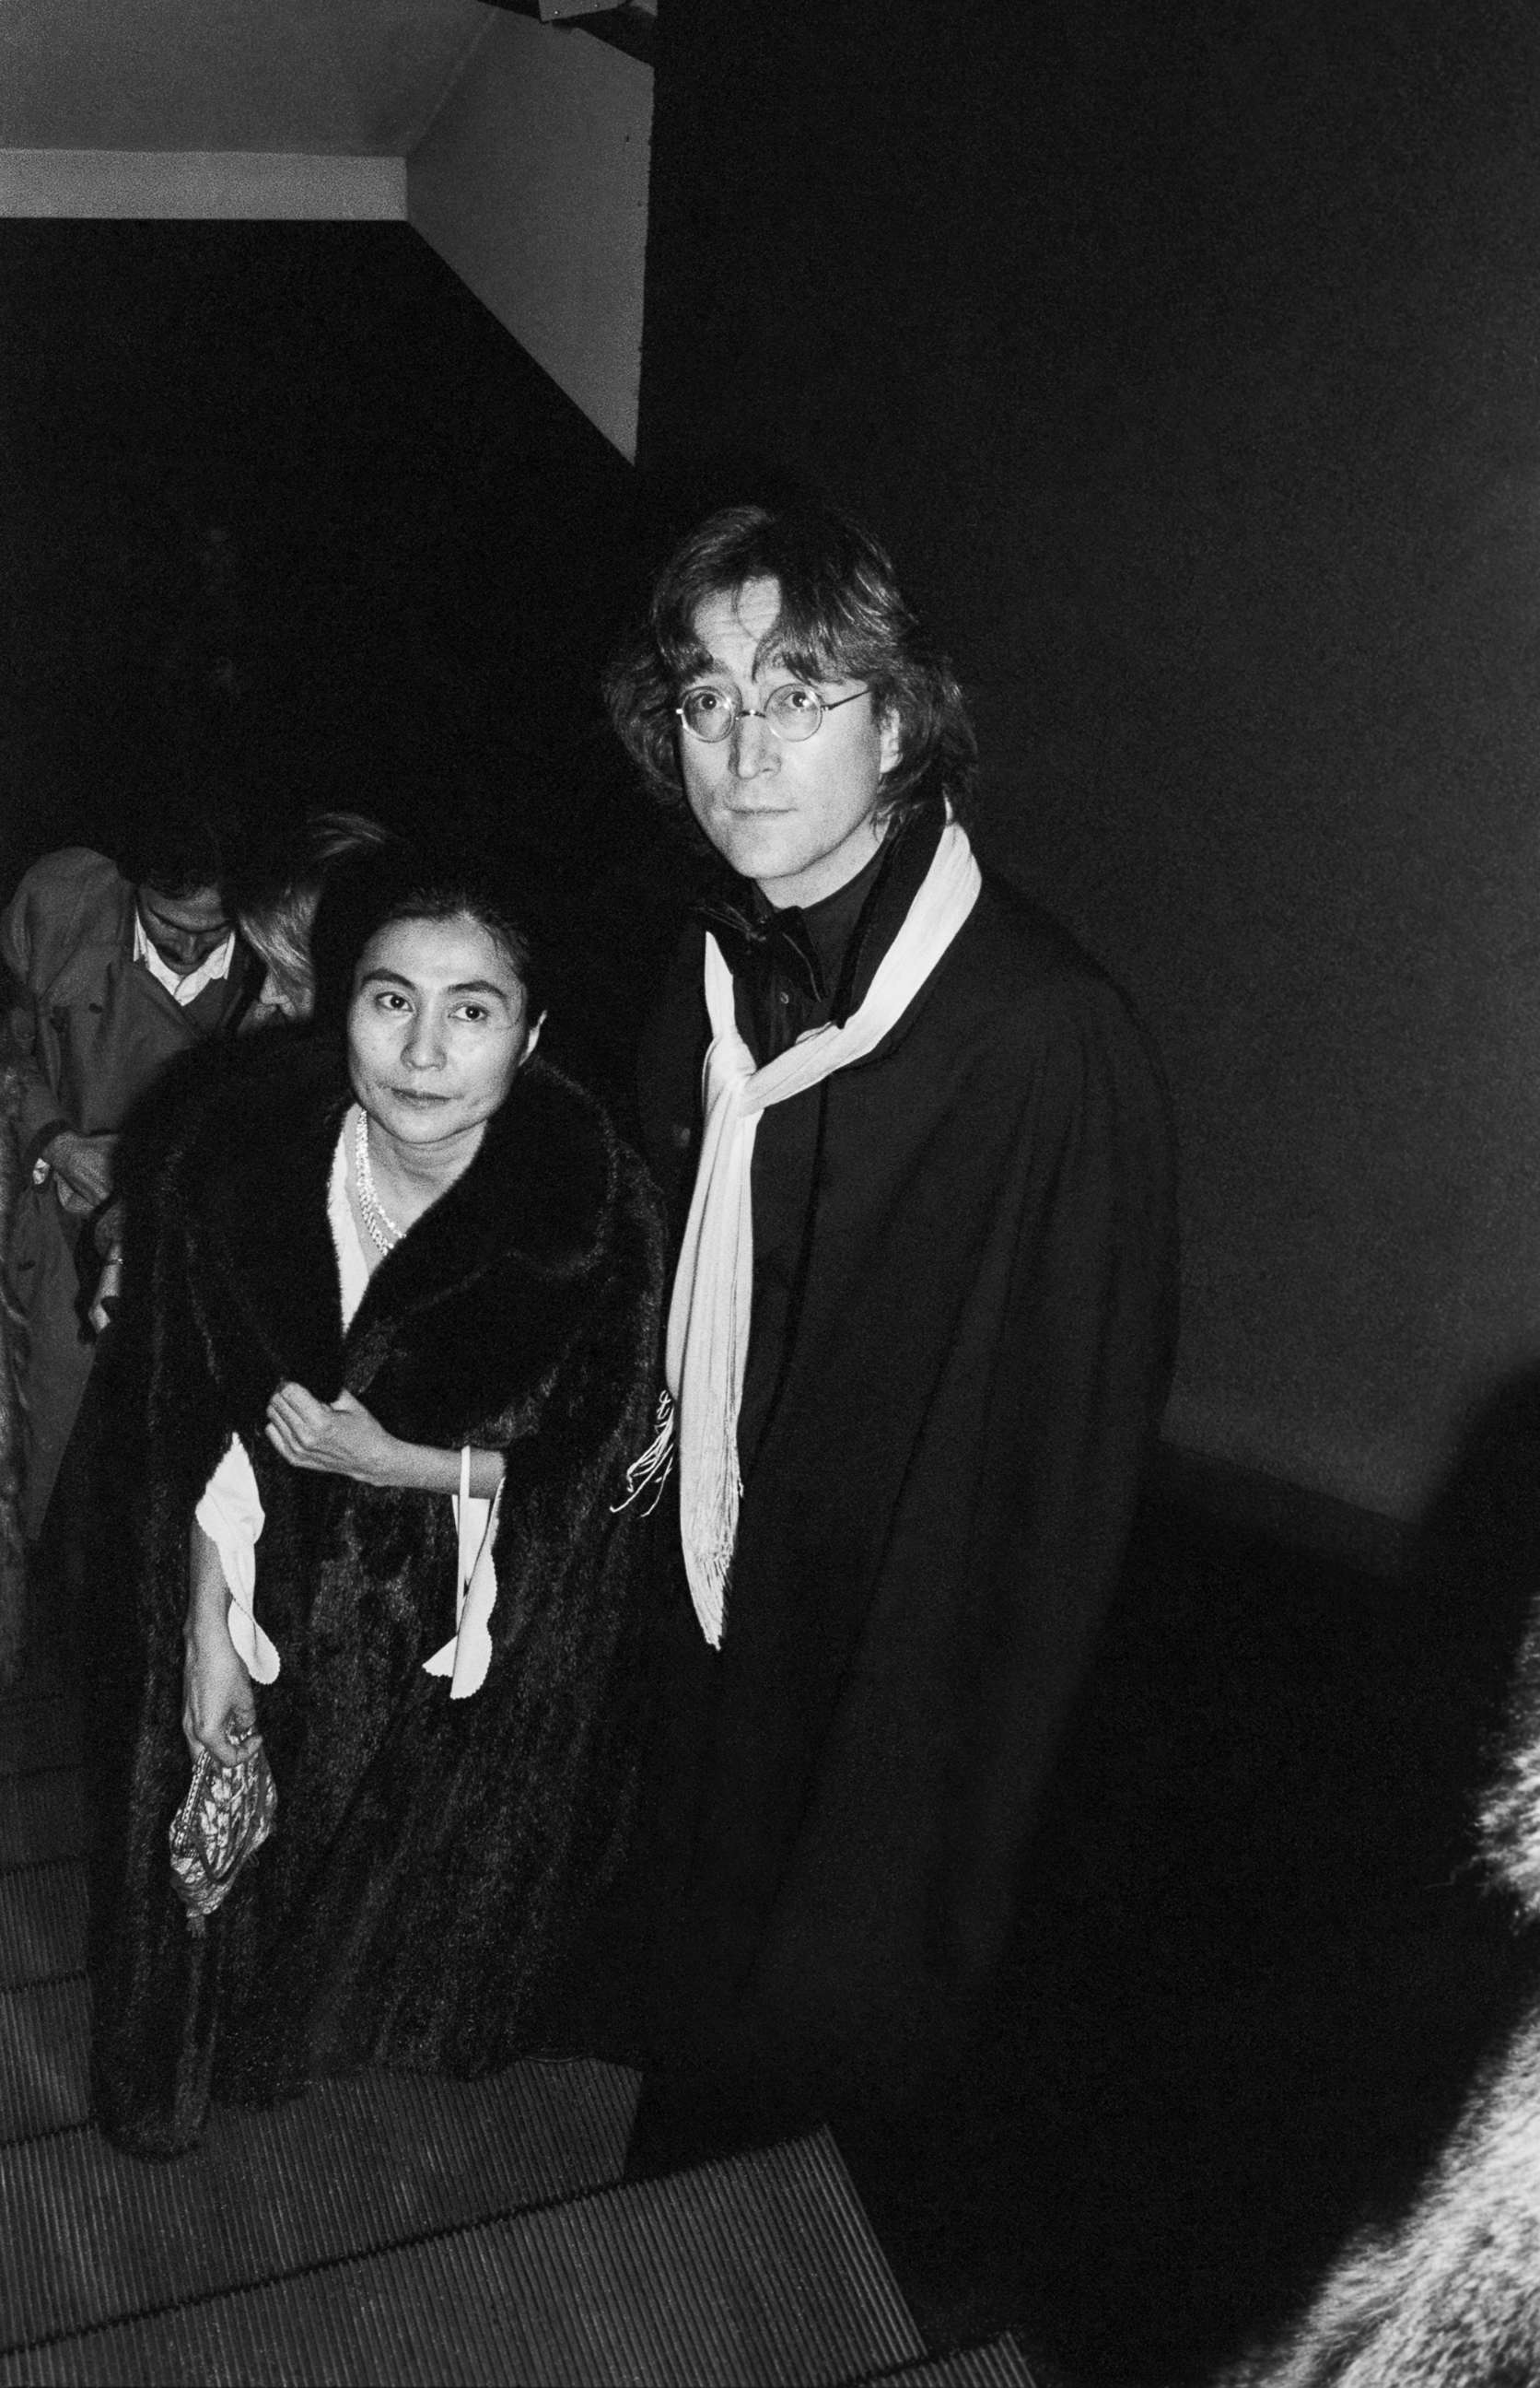 John Lennon - As usual, there is a great woman behind